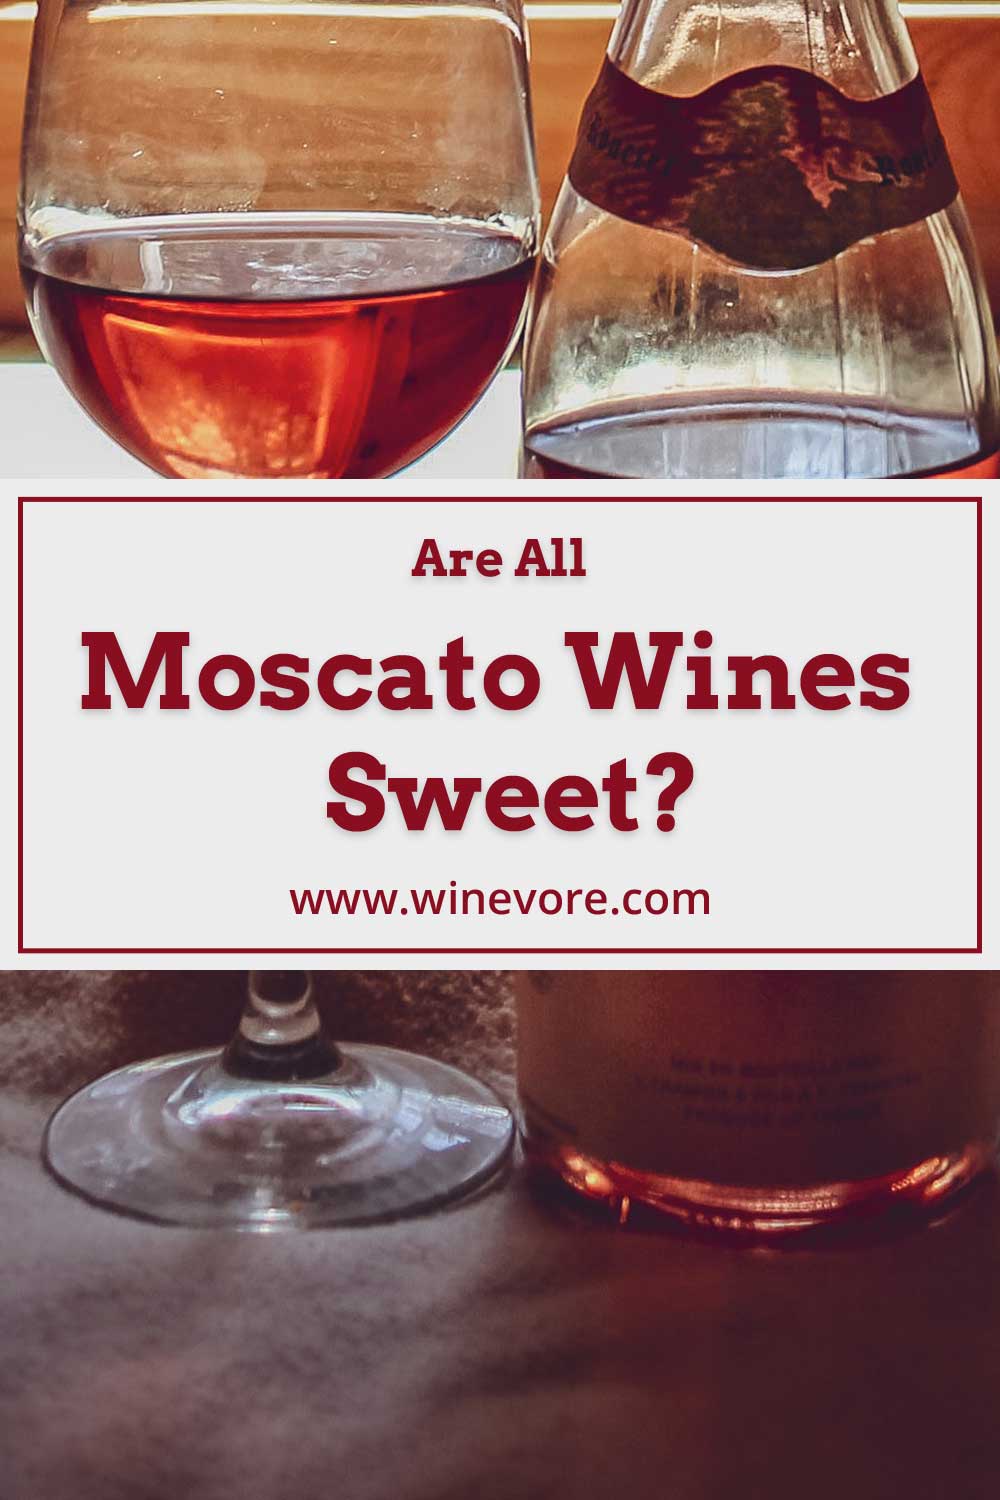 A glass and a bottle of moscato on a cloth - Are All Moscato Wines Sweet?